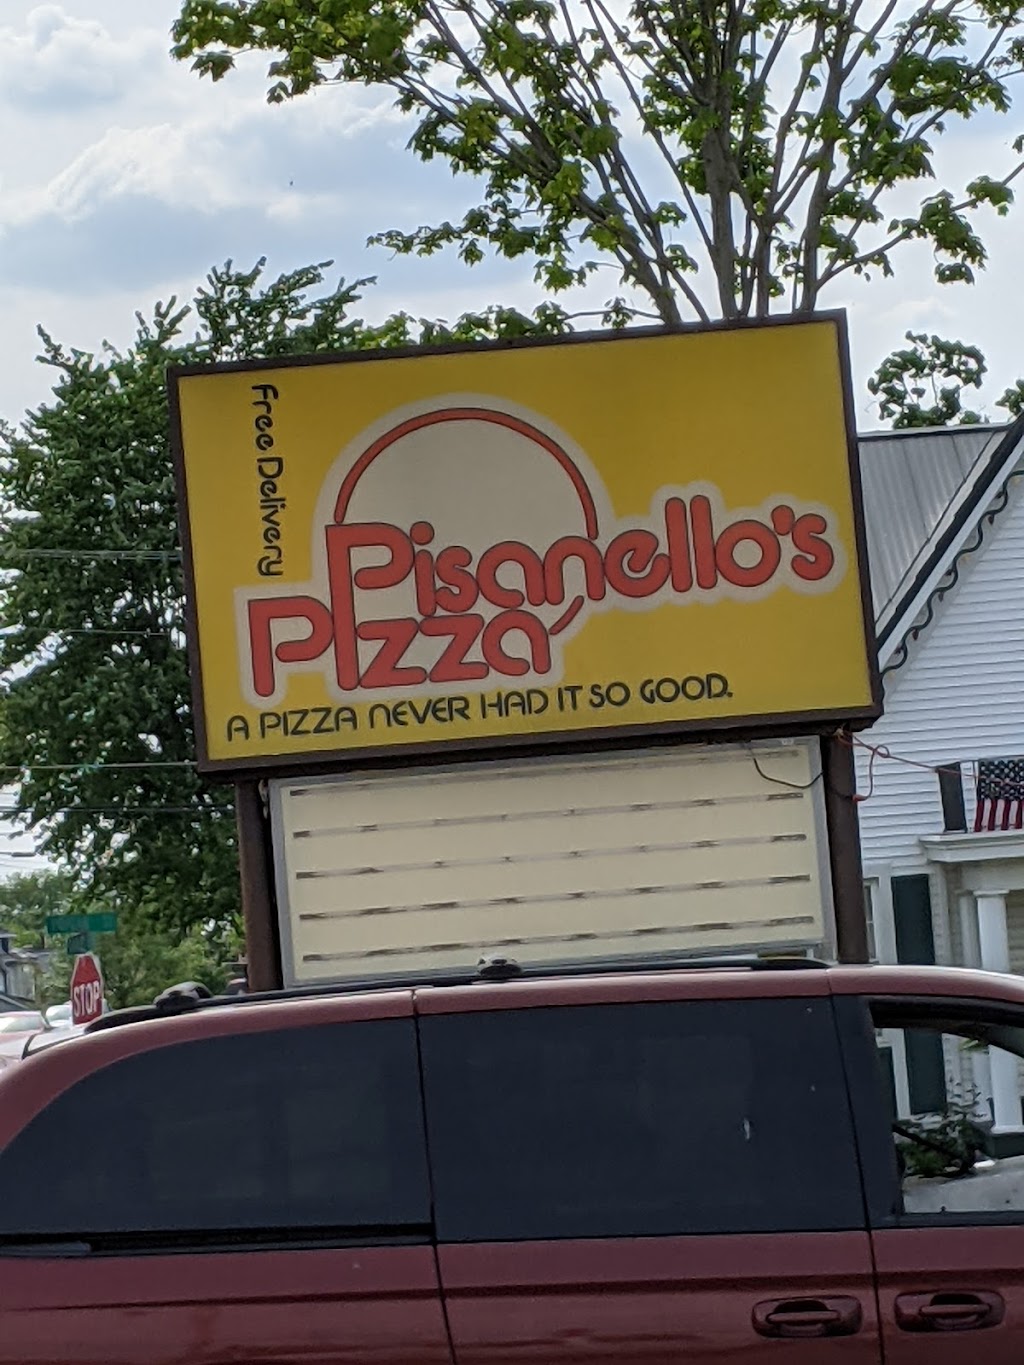 Pisanellos Pizza | 120 W Charles St, Bucyrus, OH 44820 | Phone: (419) 562-3400